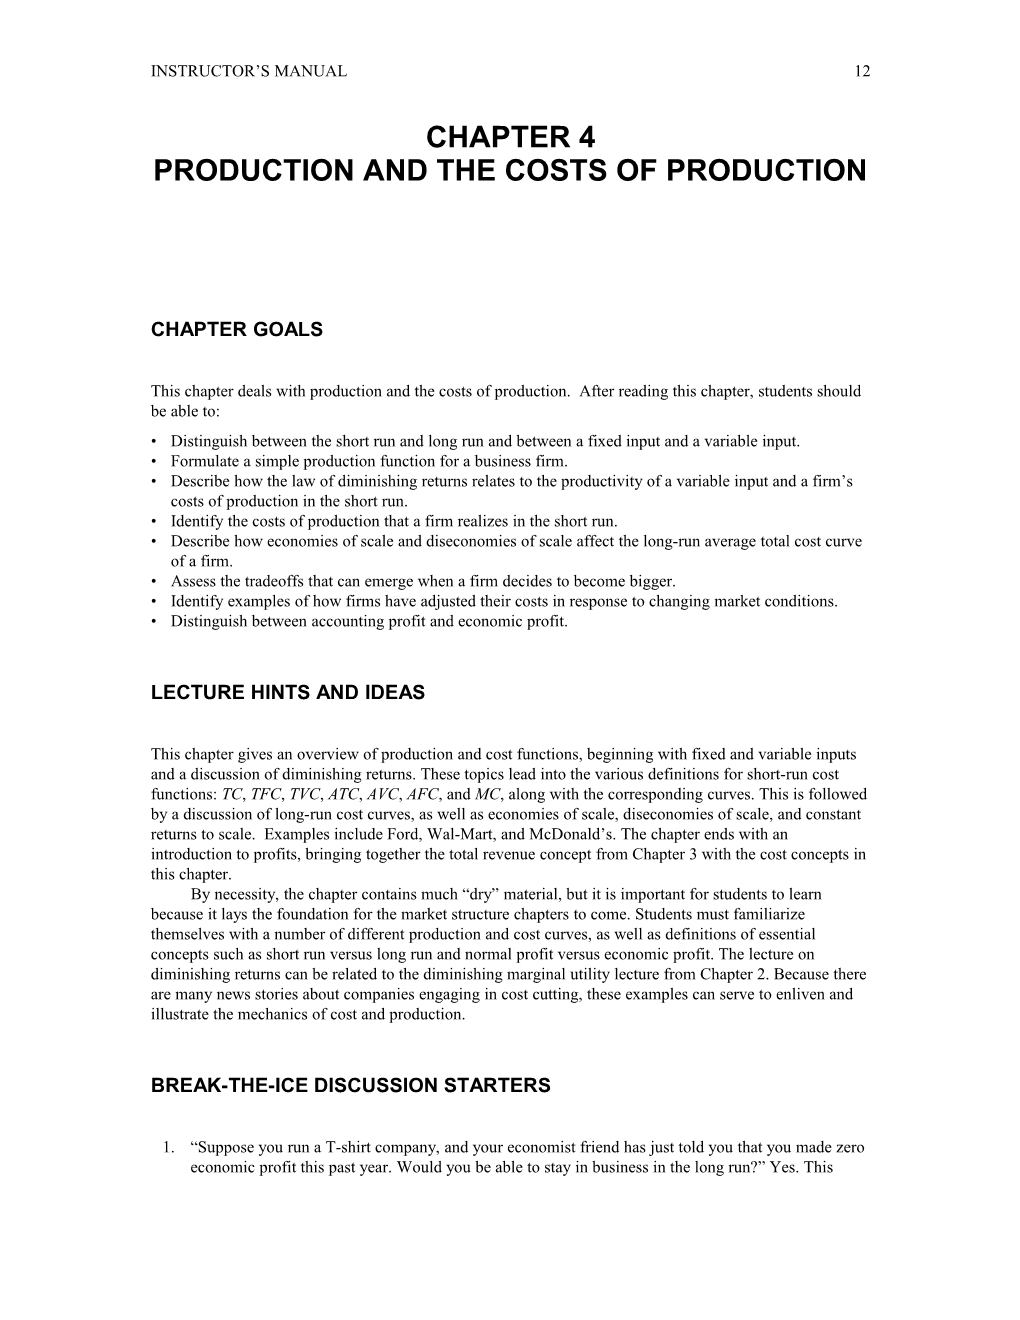 Chapter 4 Production and the Costs of Production